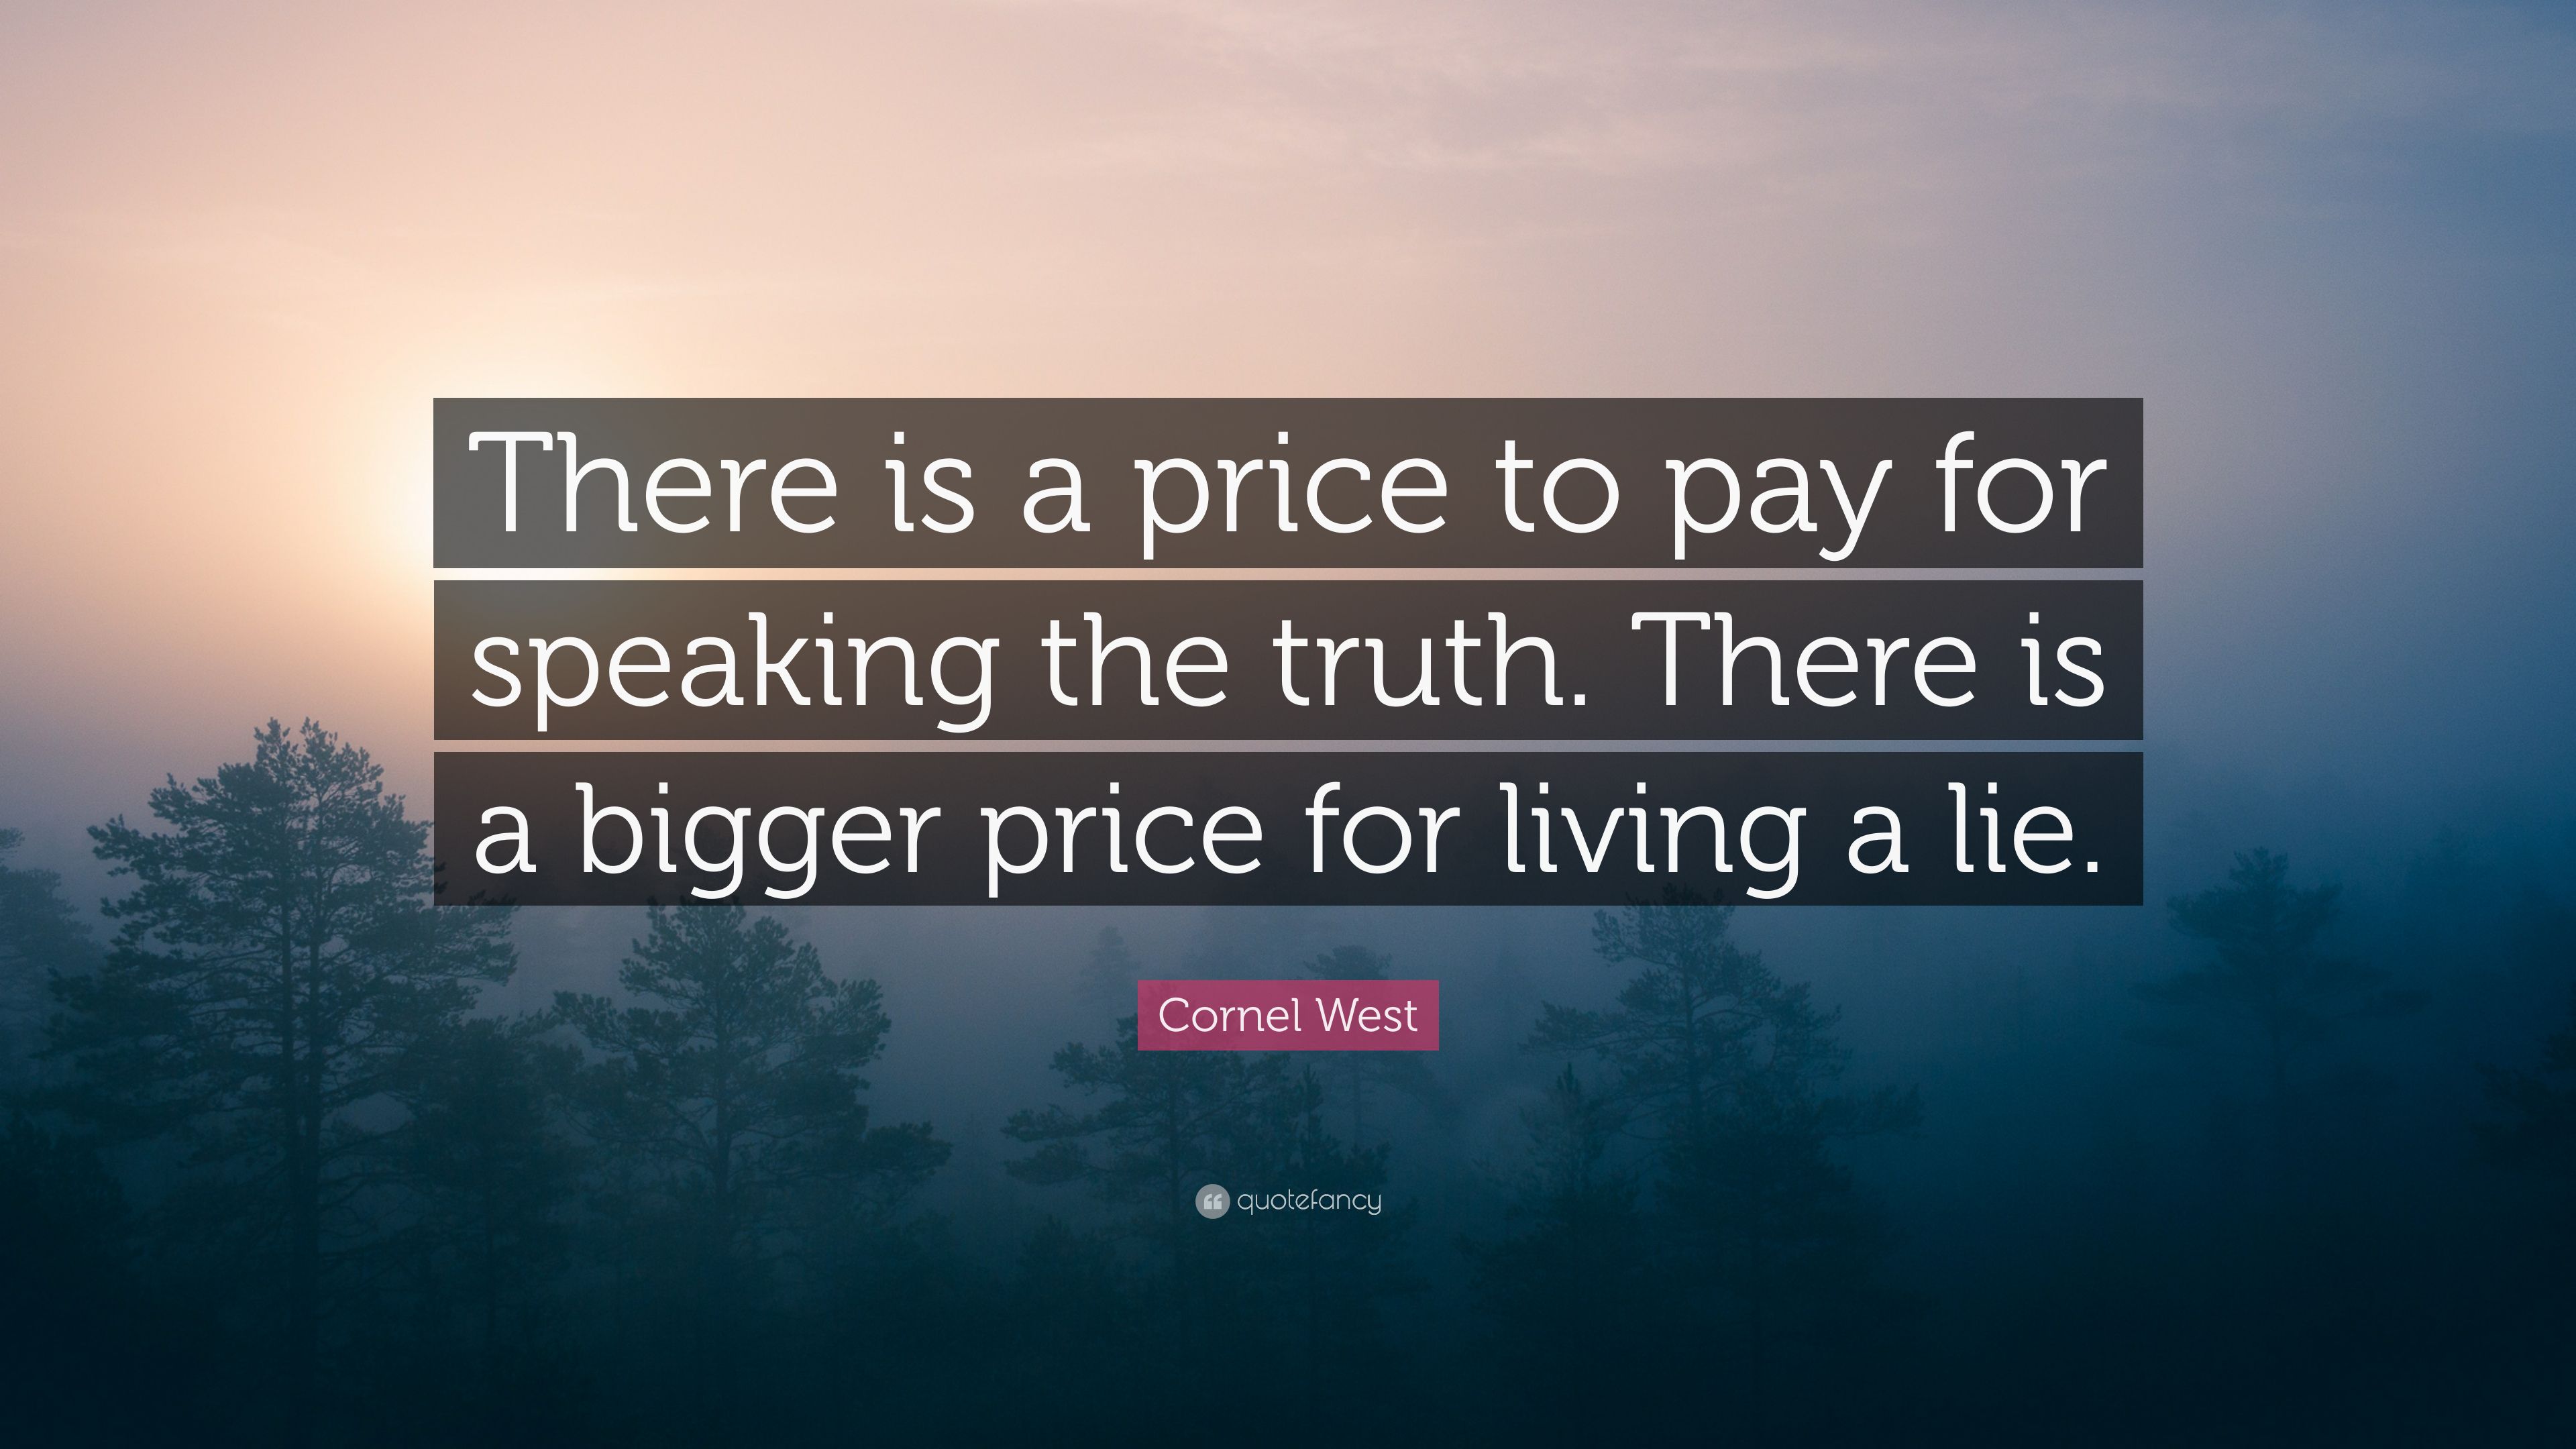 Cornel West Quote: “There is a price to pay for speaking the truth